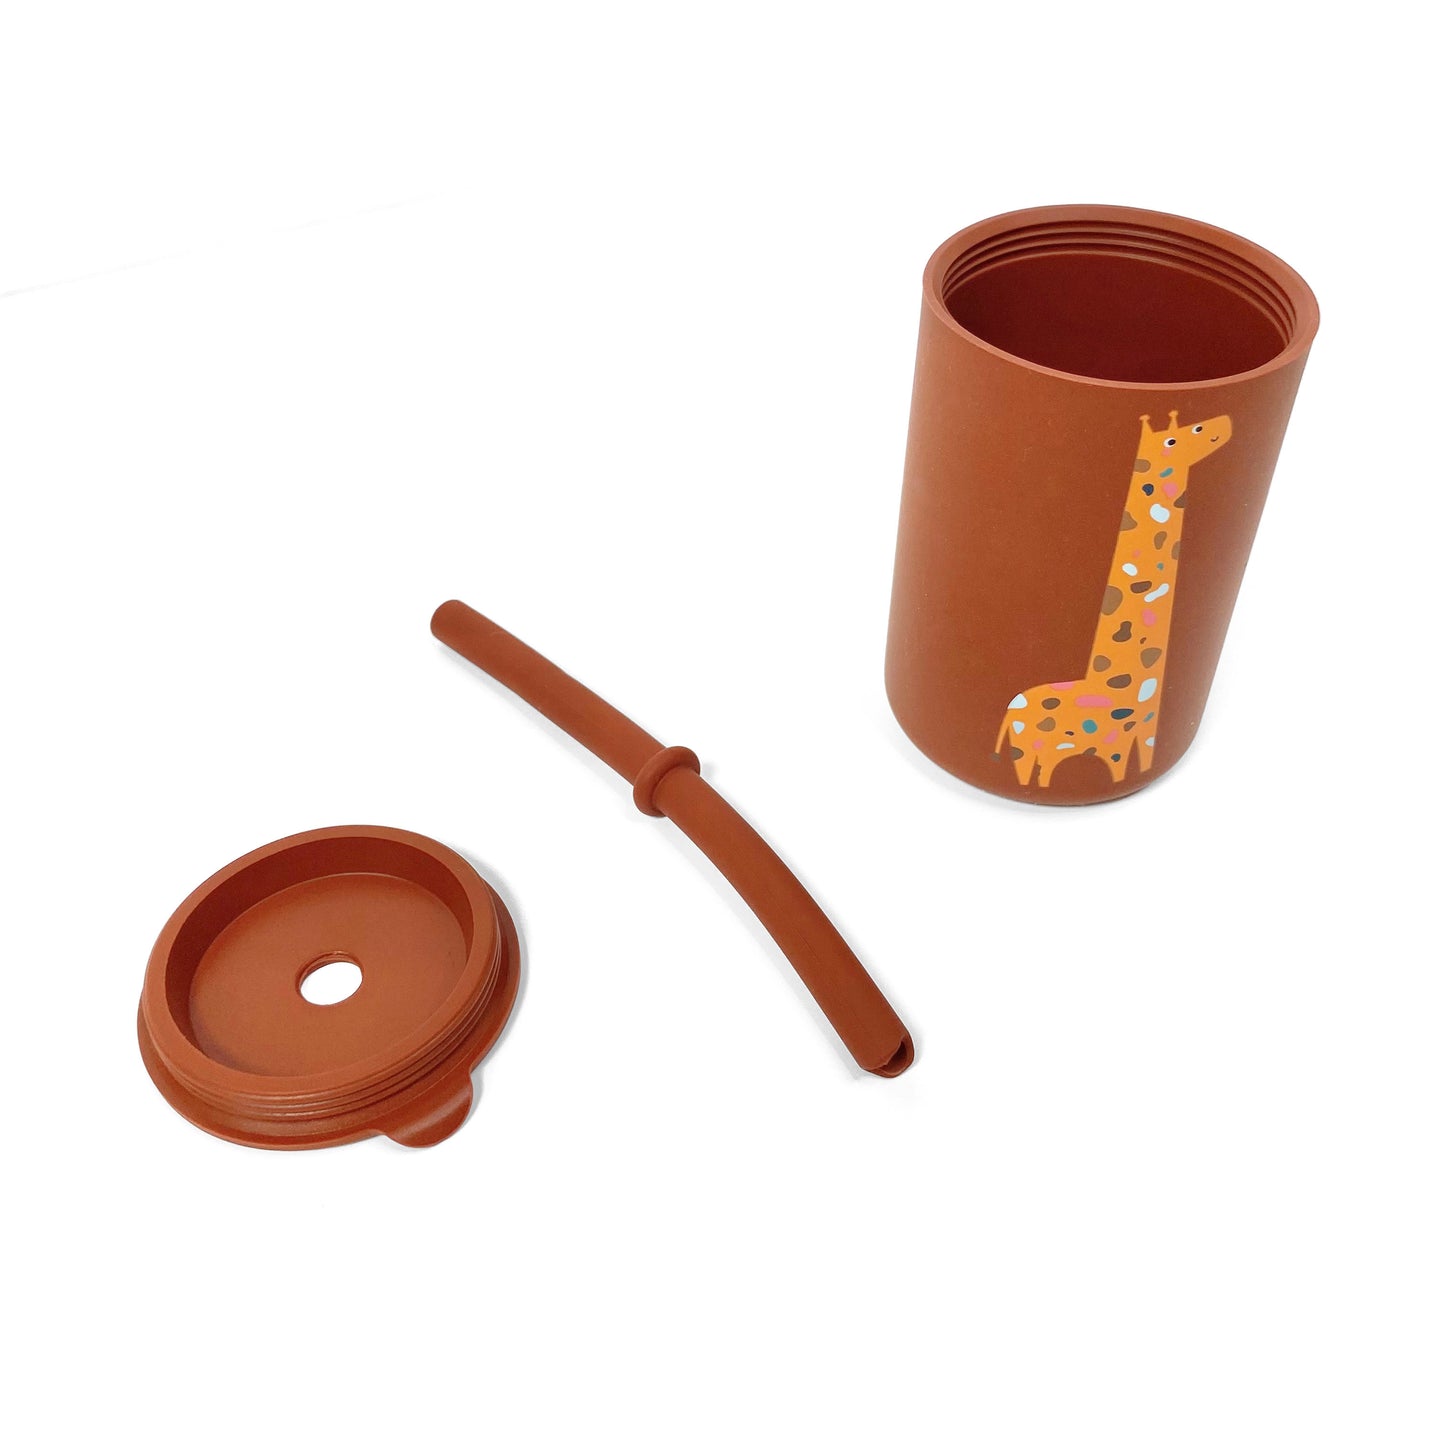 A children’s brown silicone drinking cup, with matching lid and straw, featuring a giraffe design. The image shows the cup, lid and straw separately.